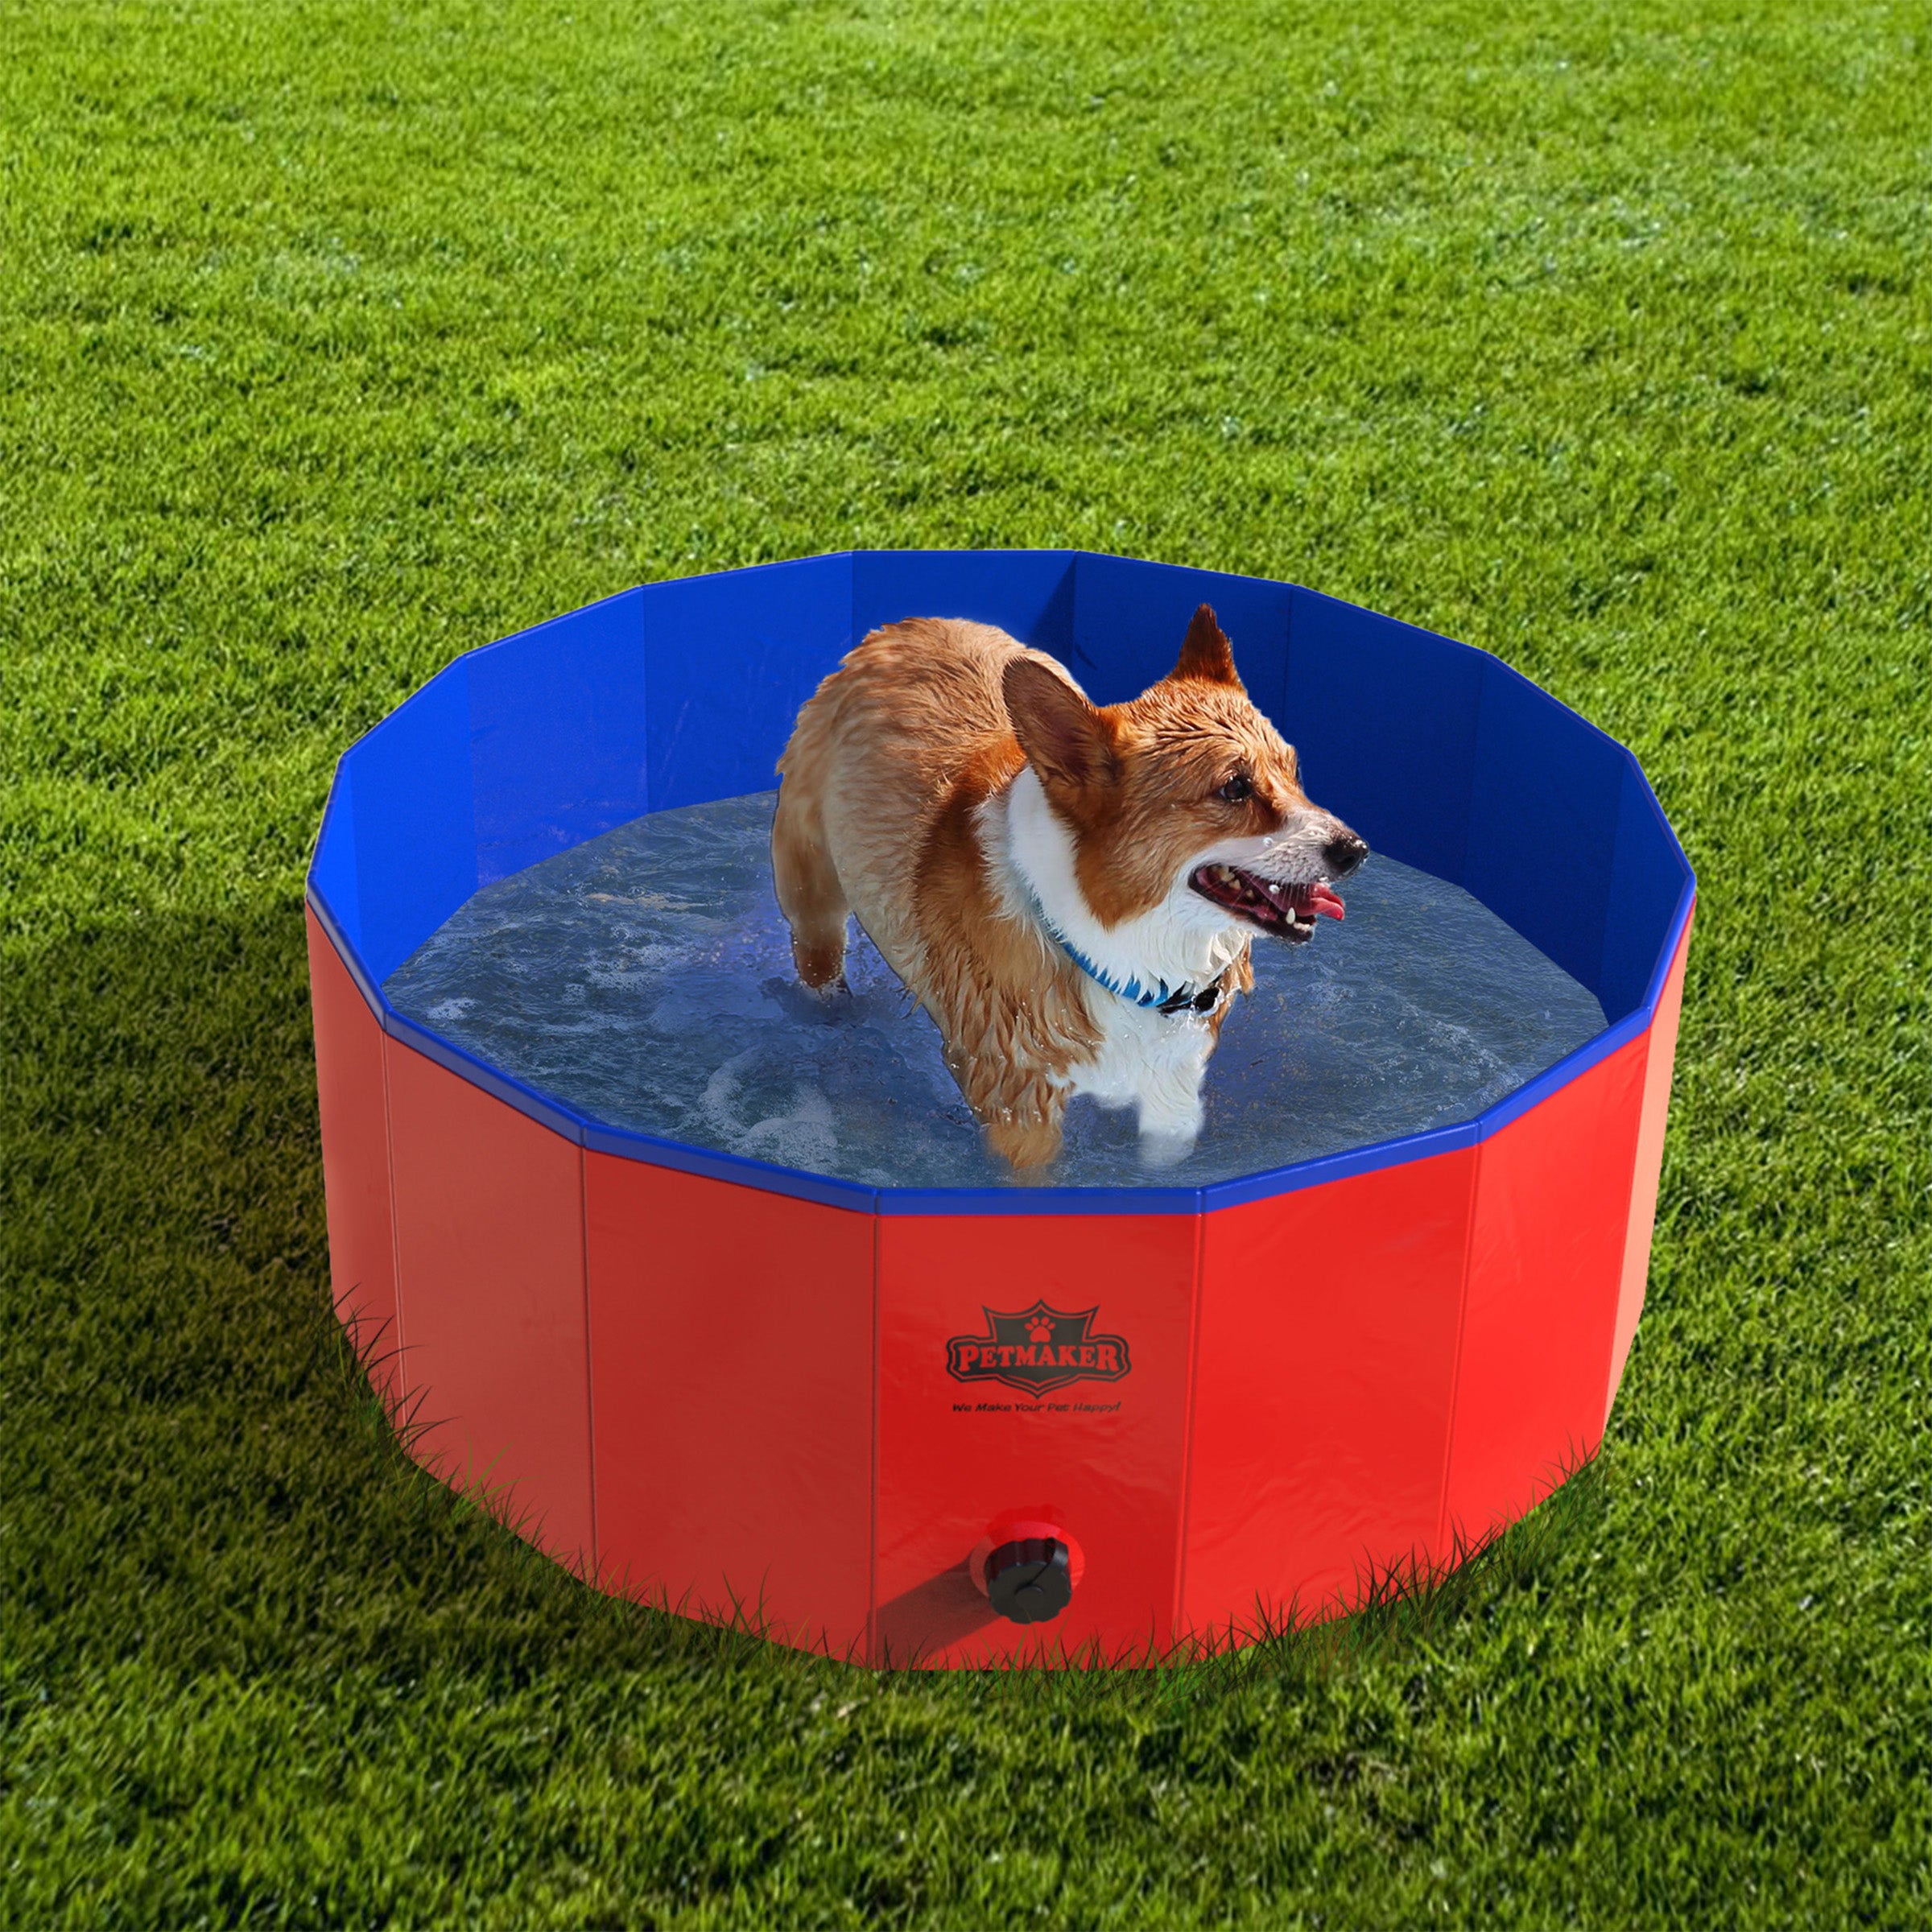 Dog Pool - Portable， Foldable 30.5-Inch Doggie Pool with Drain and Carry Bag - Pet Swimming Pool for Bathing or Play by PETMAKER (Red)